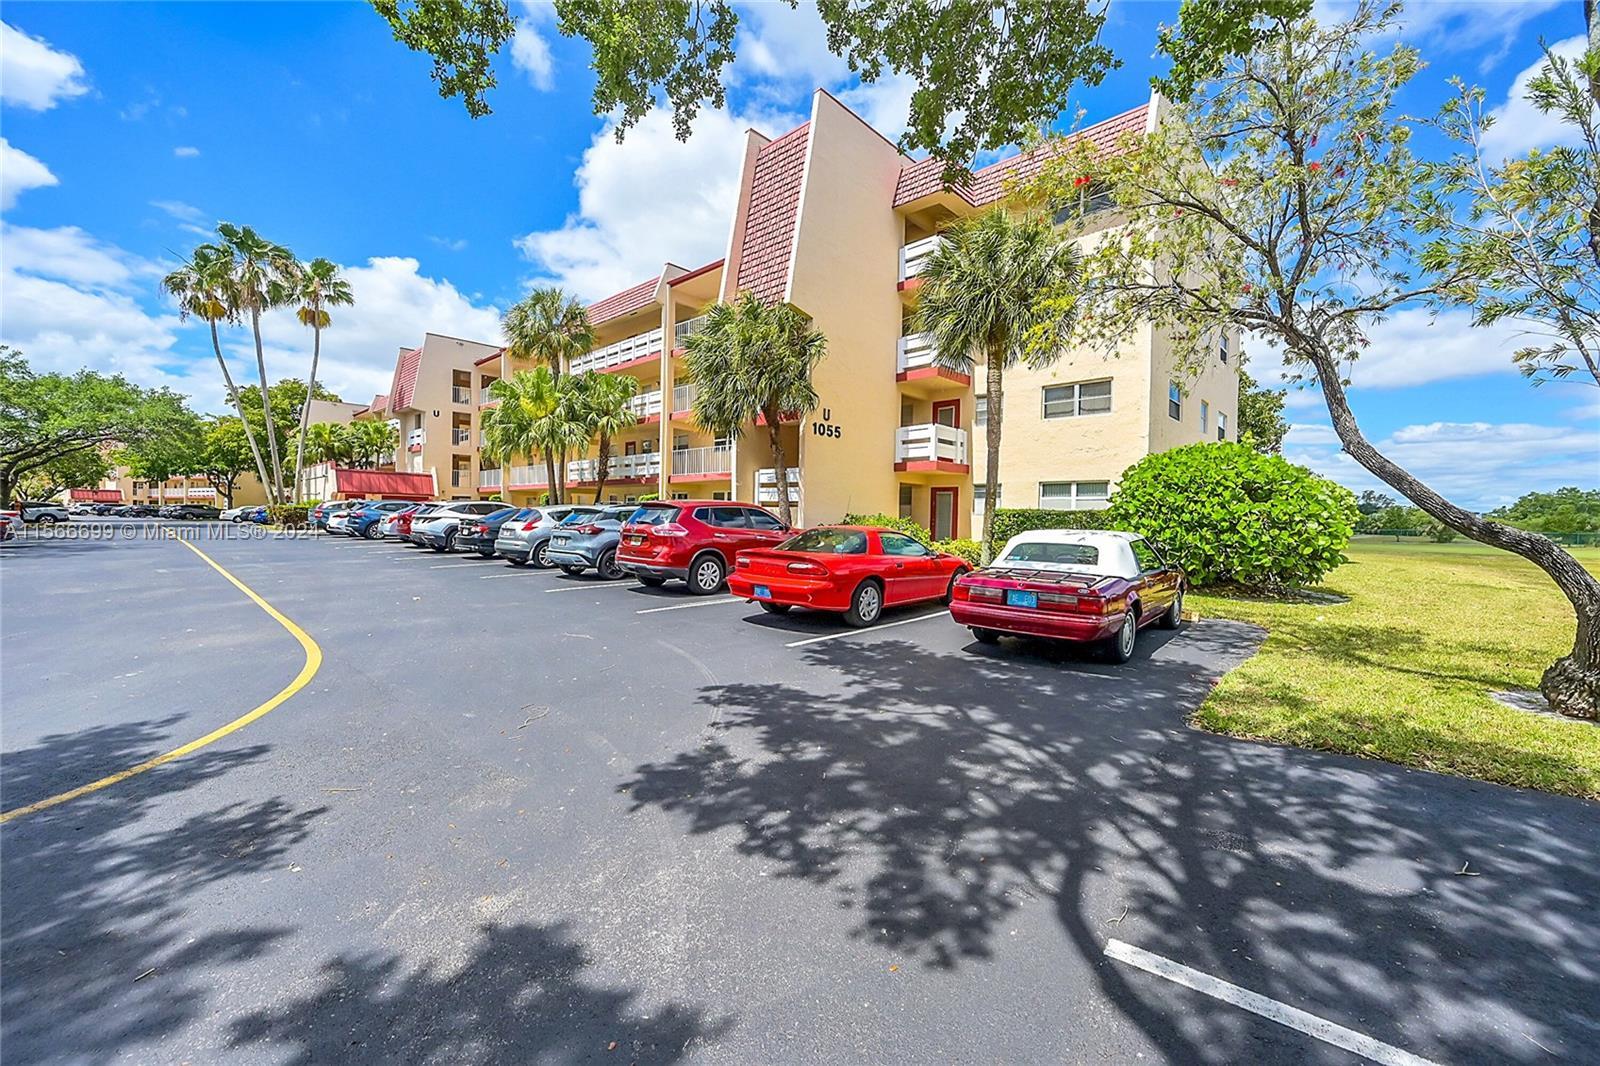 Photo of 1055 Country Club Dr #205 in Margate, FL